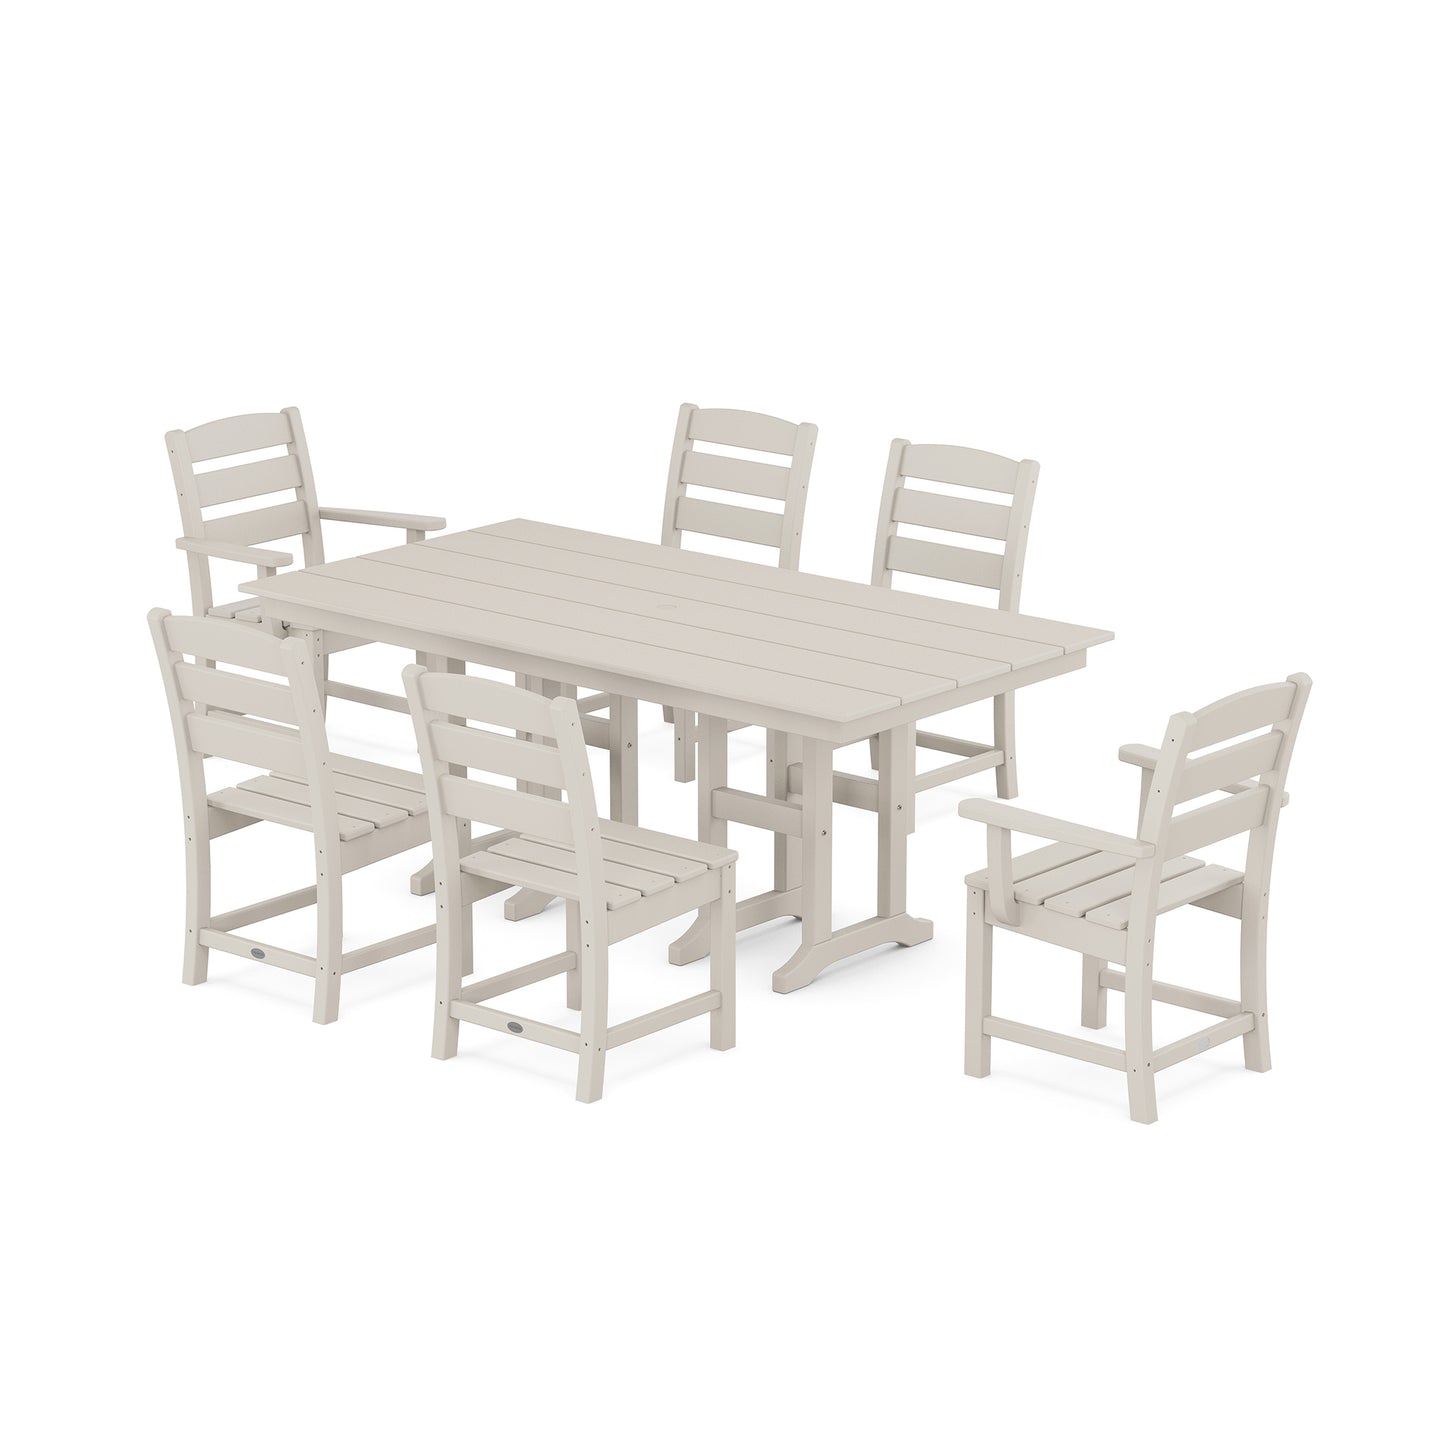 A modern POLYWOOD Lakeside 7-Piece Farmhouse Dining Set with six white chairs and a rectangular table, all made of durable material, isolated on a white background.